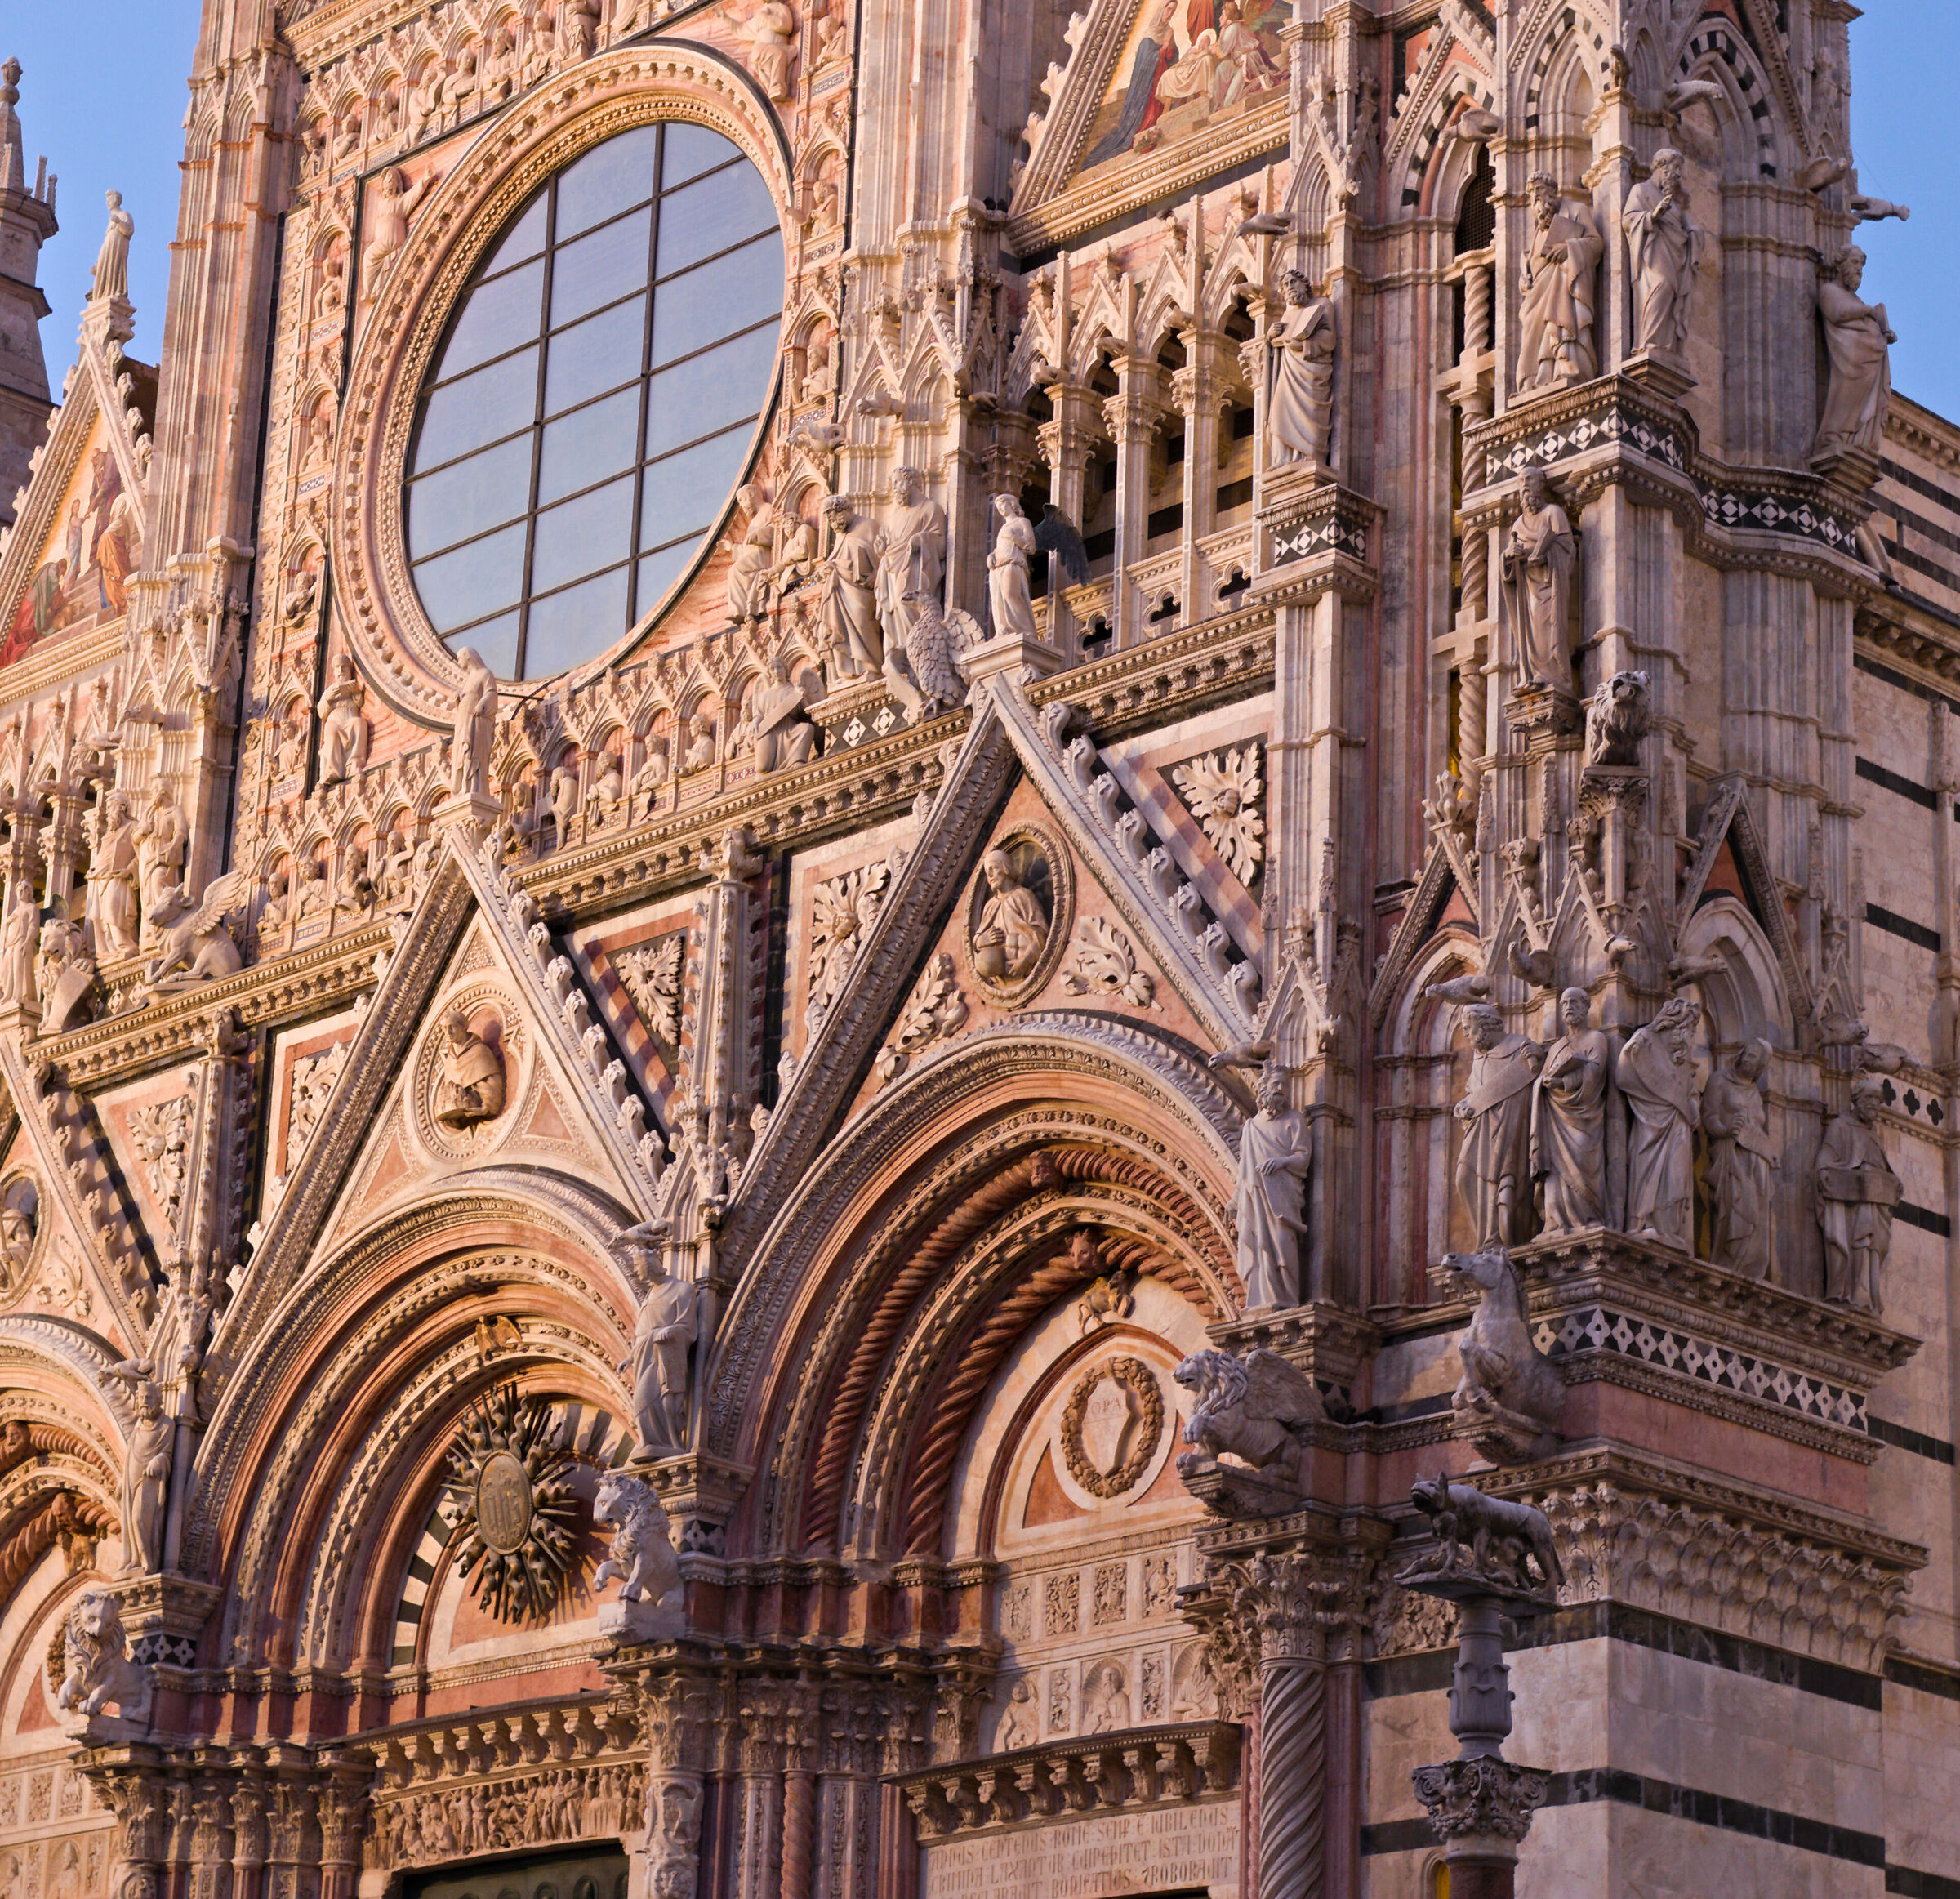 The facade of the Cathedral of Siena...